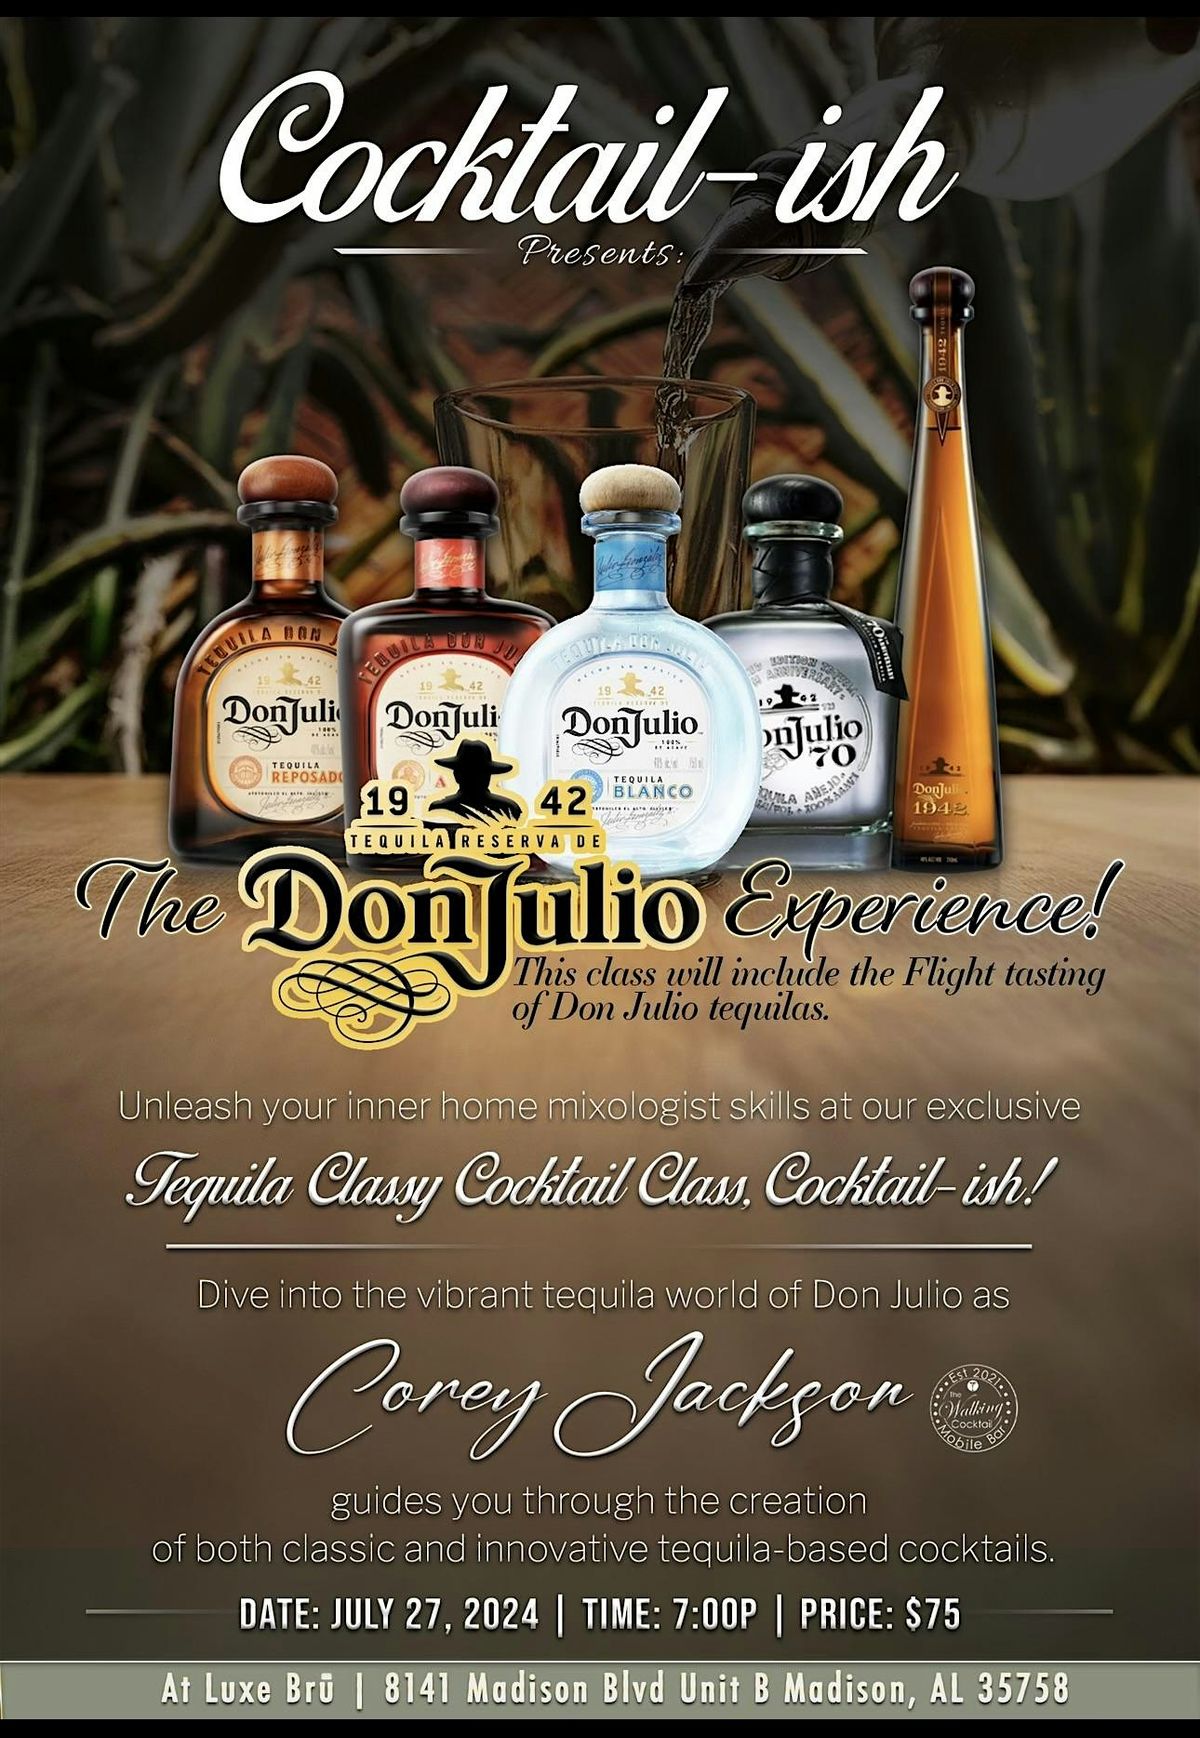 Cocktail-ish: The DonJulio Experience